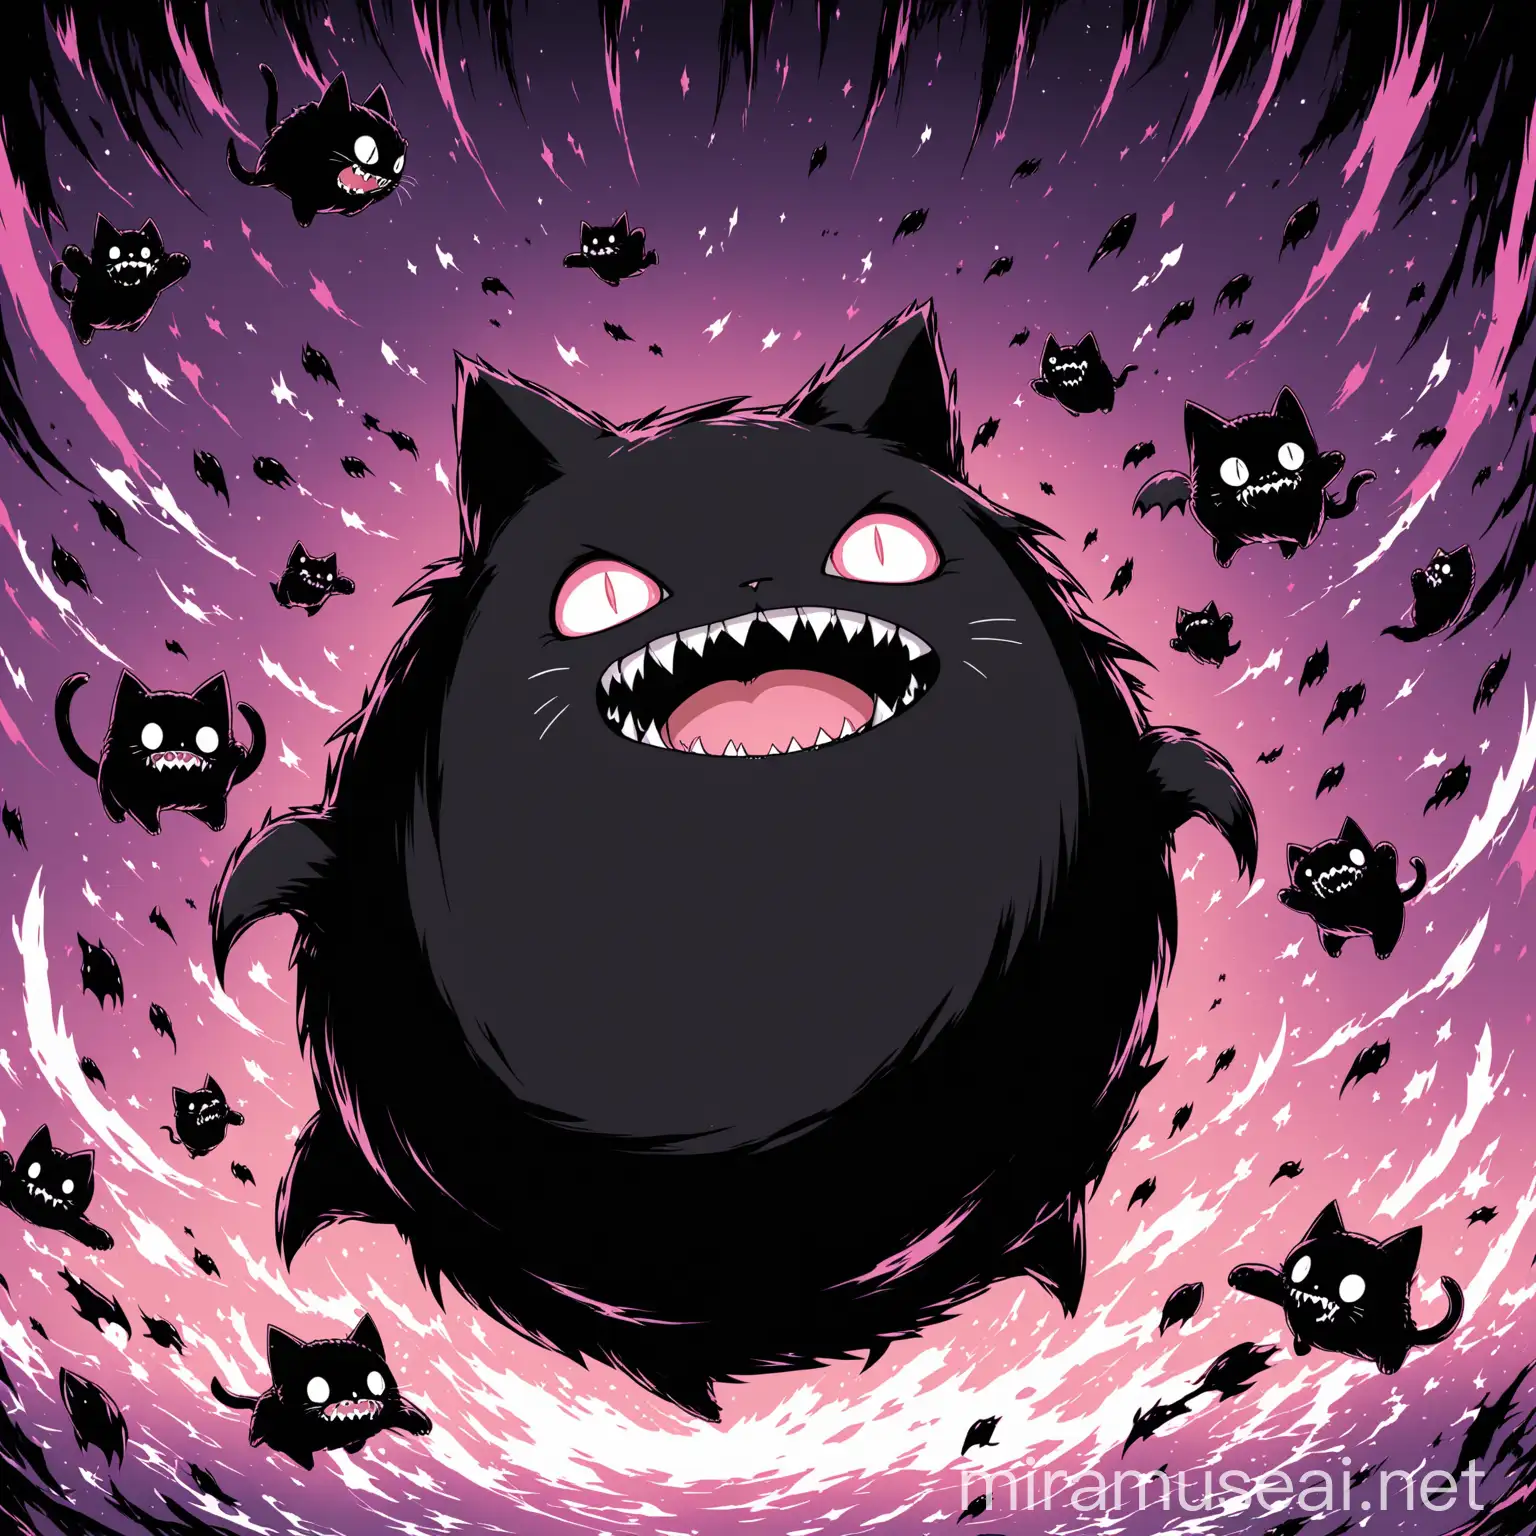 cat escaping from a large black sack style of somber terror monster fangs scary magical fantasy kawaiicore